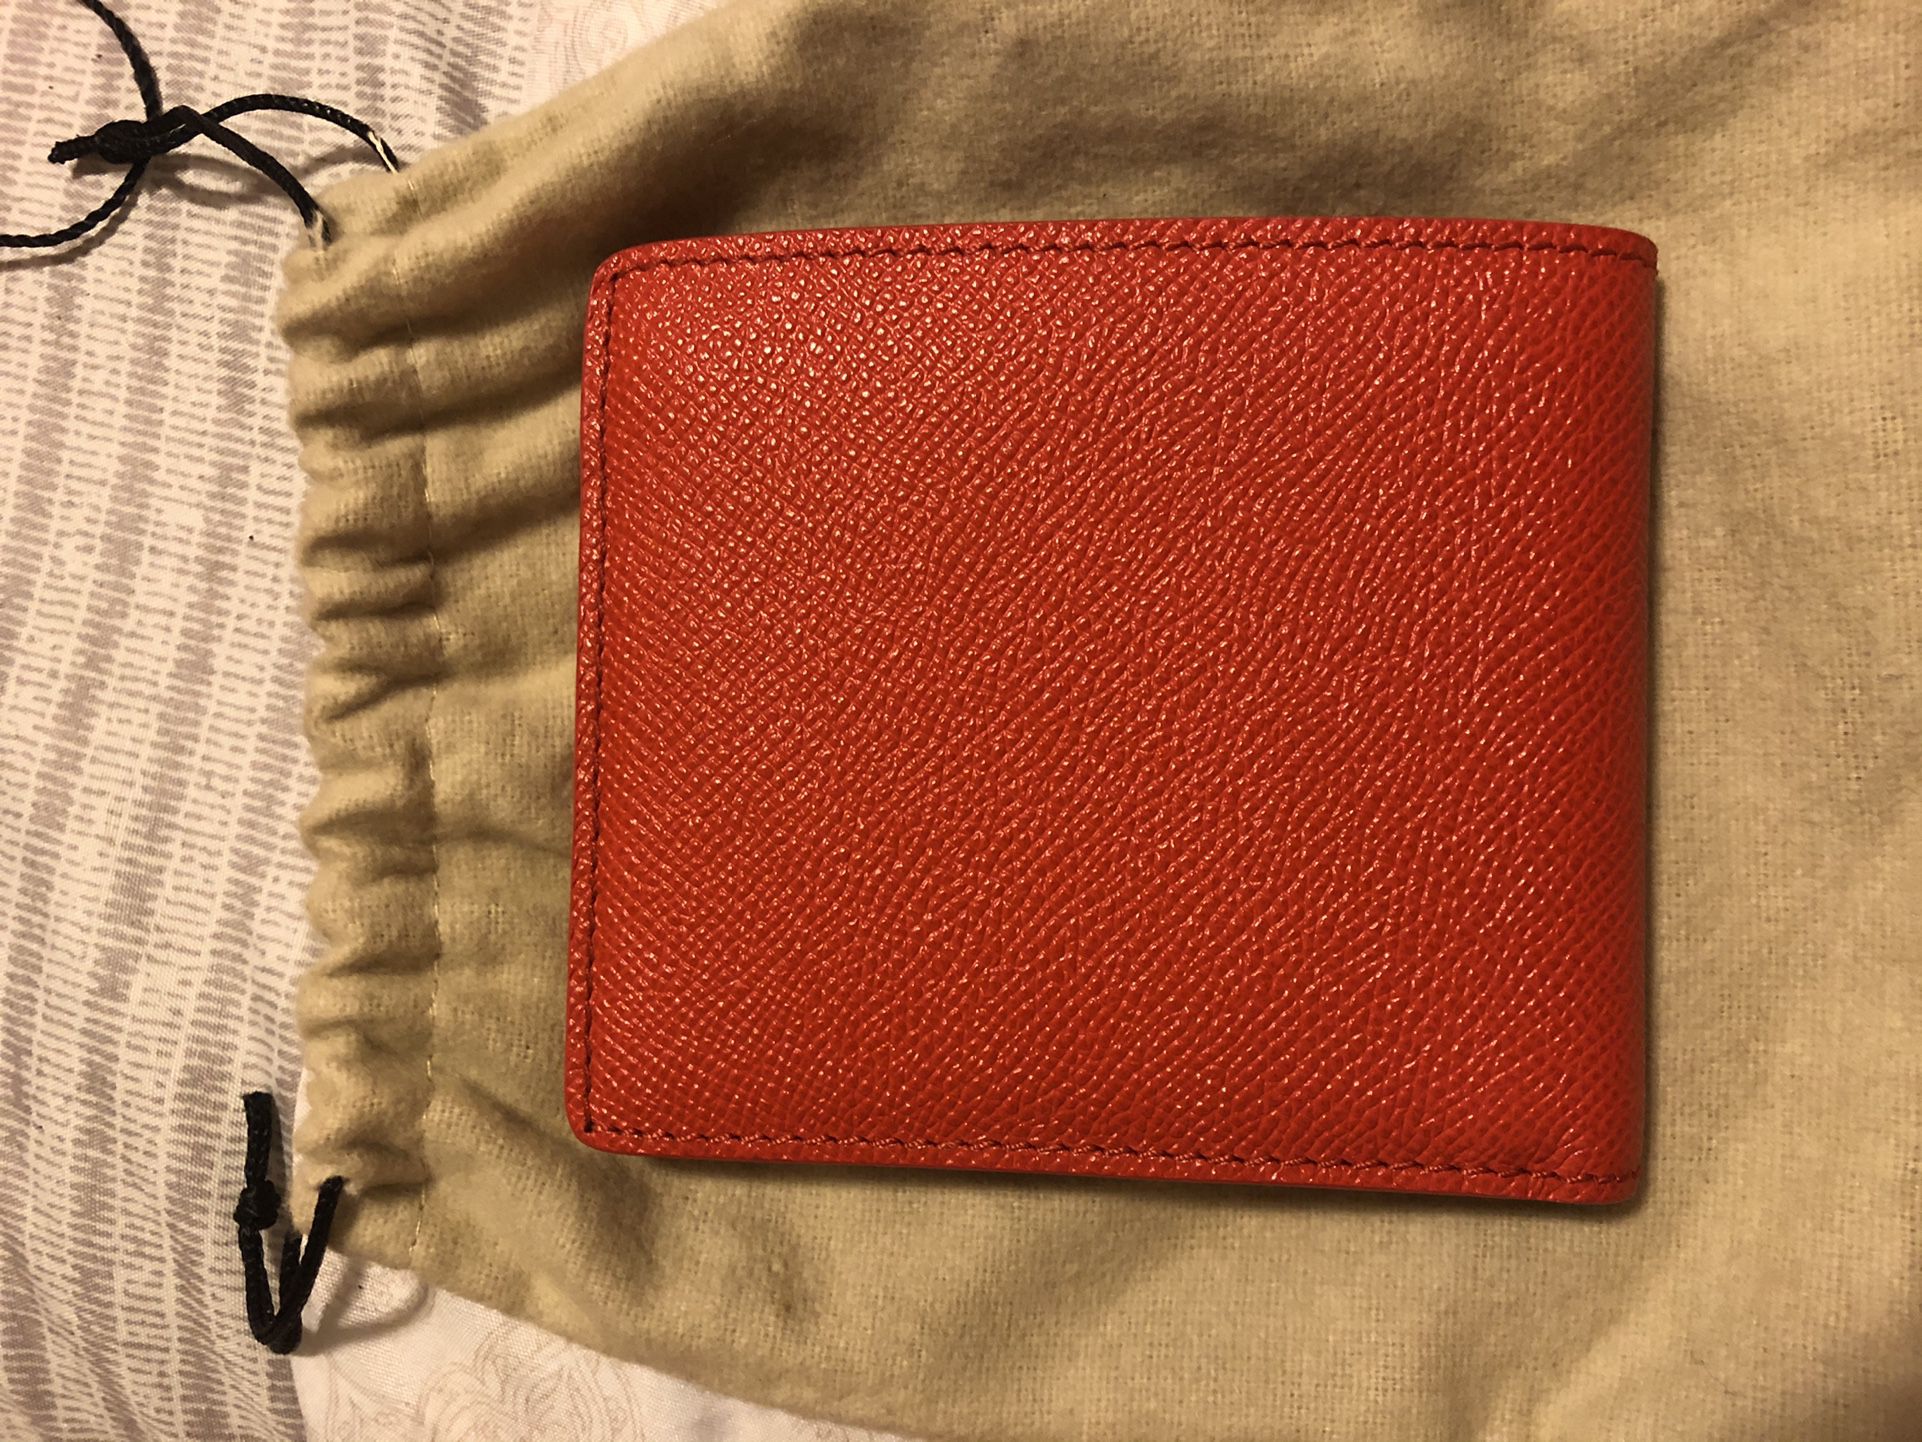 Burberry Wallet for Sale in Hillsboro, OR - OfferUp